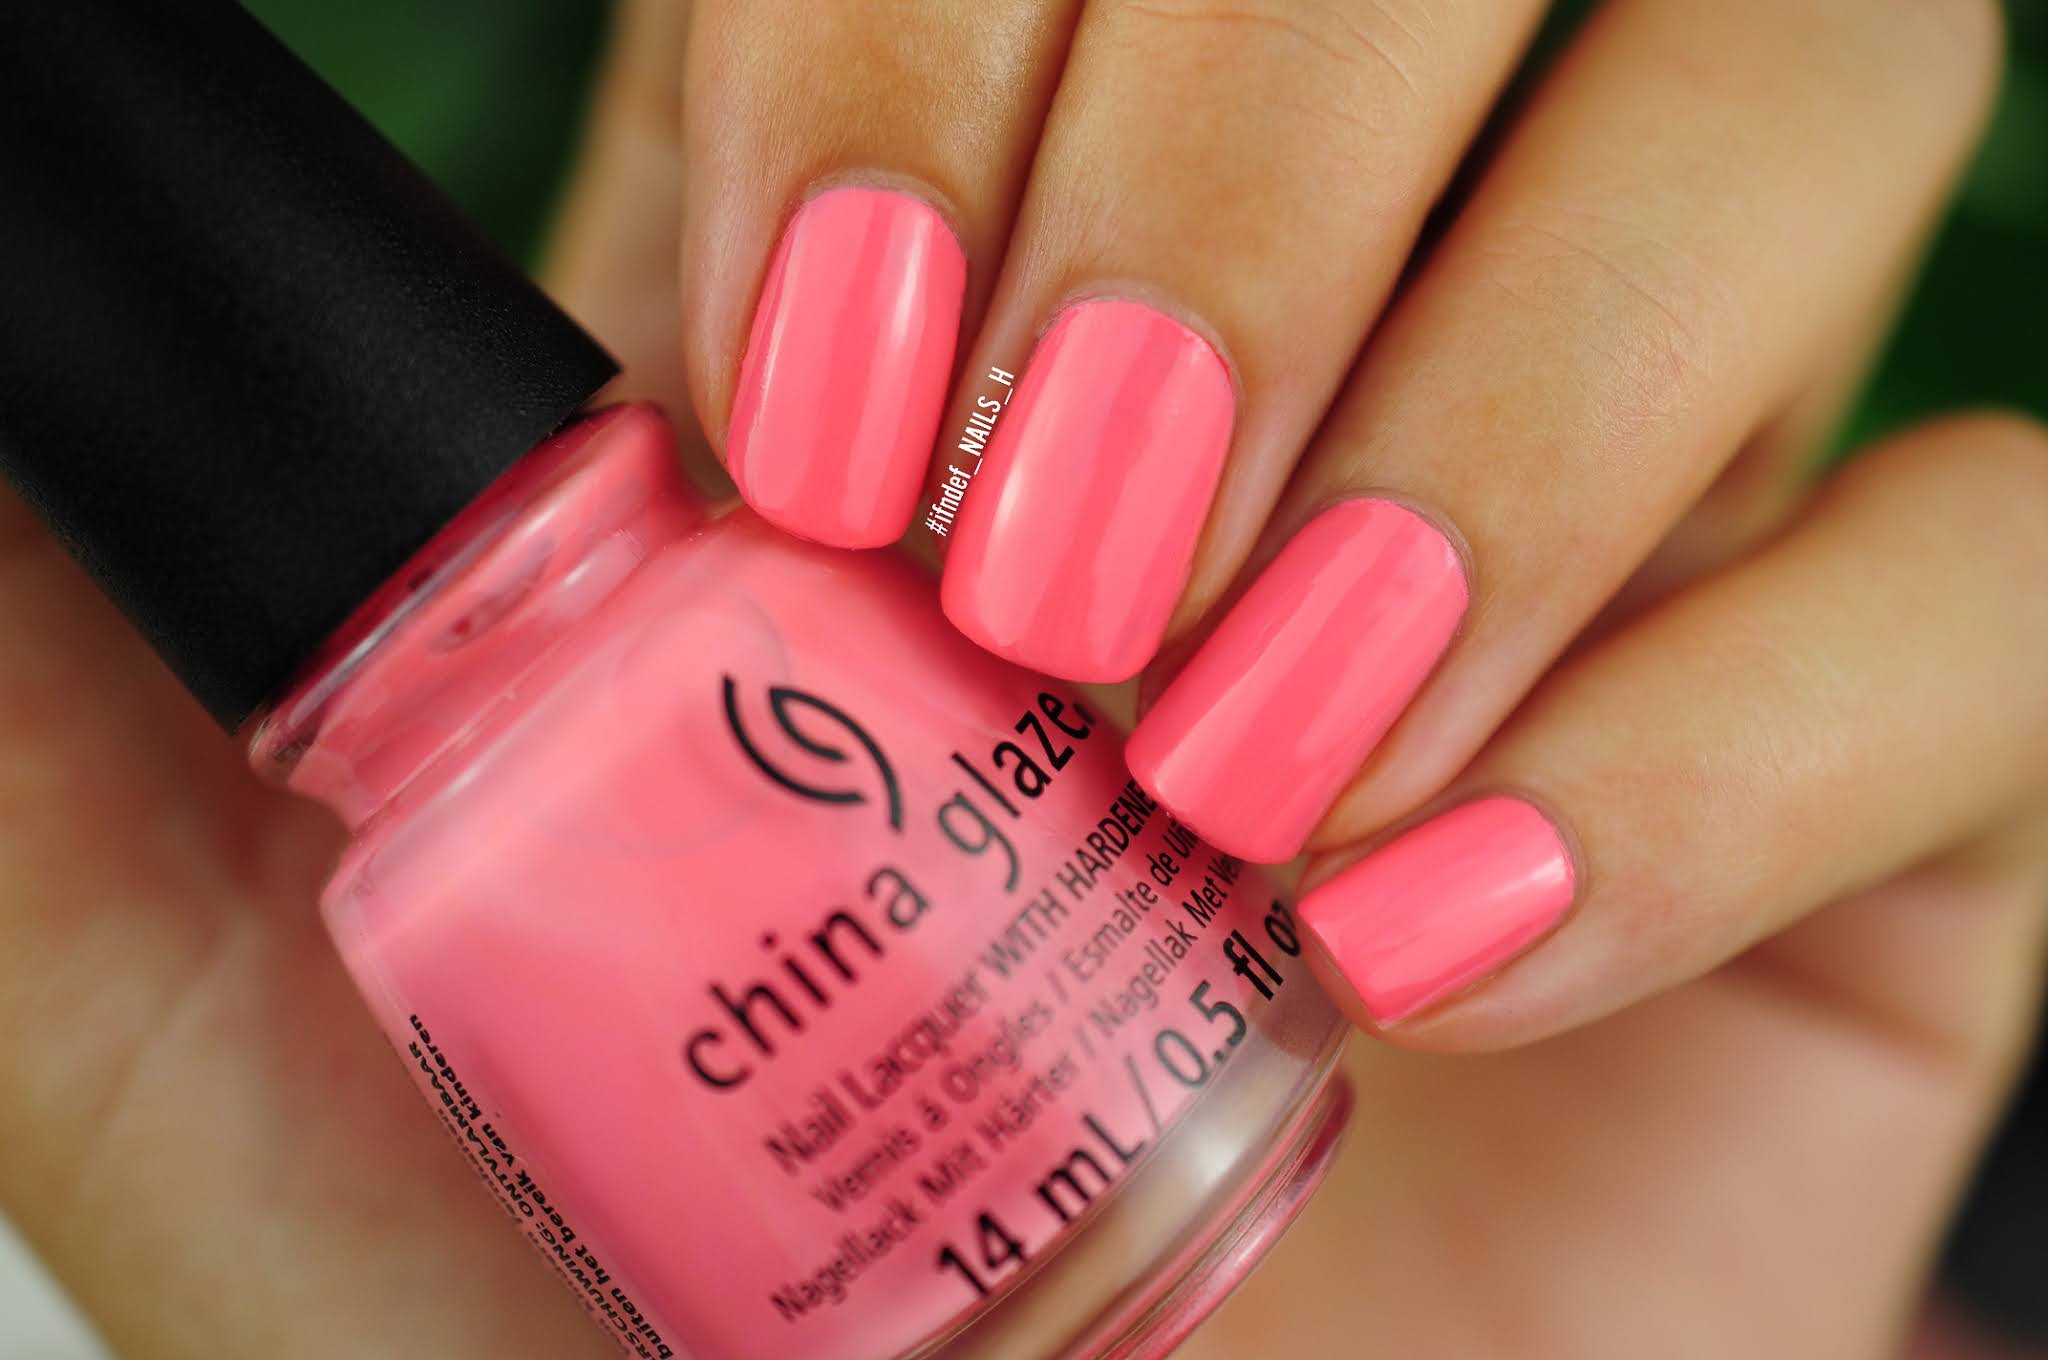 China Glaze Cali Dreams Spring 2021 Collection Swatches Sunset Crew 2